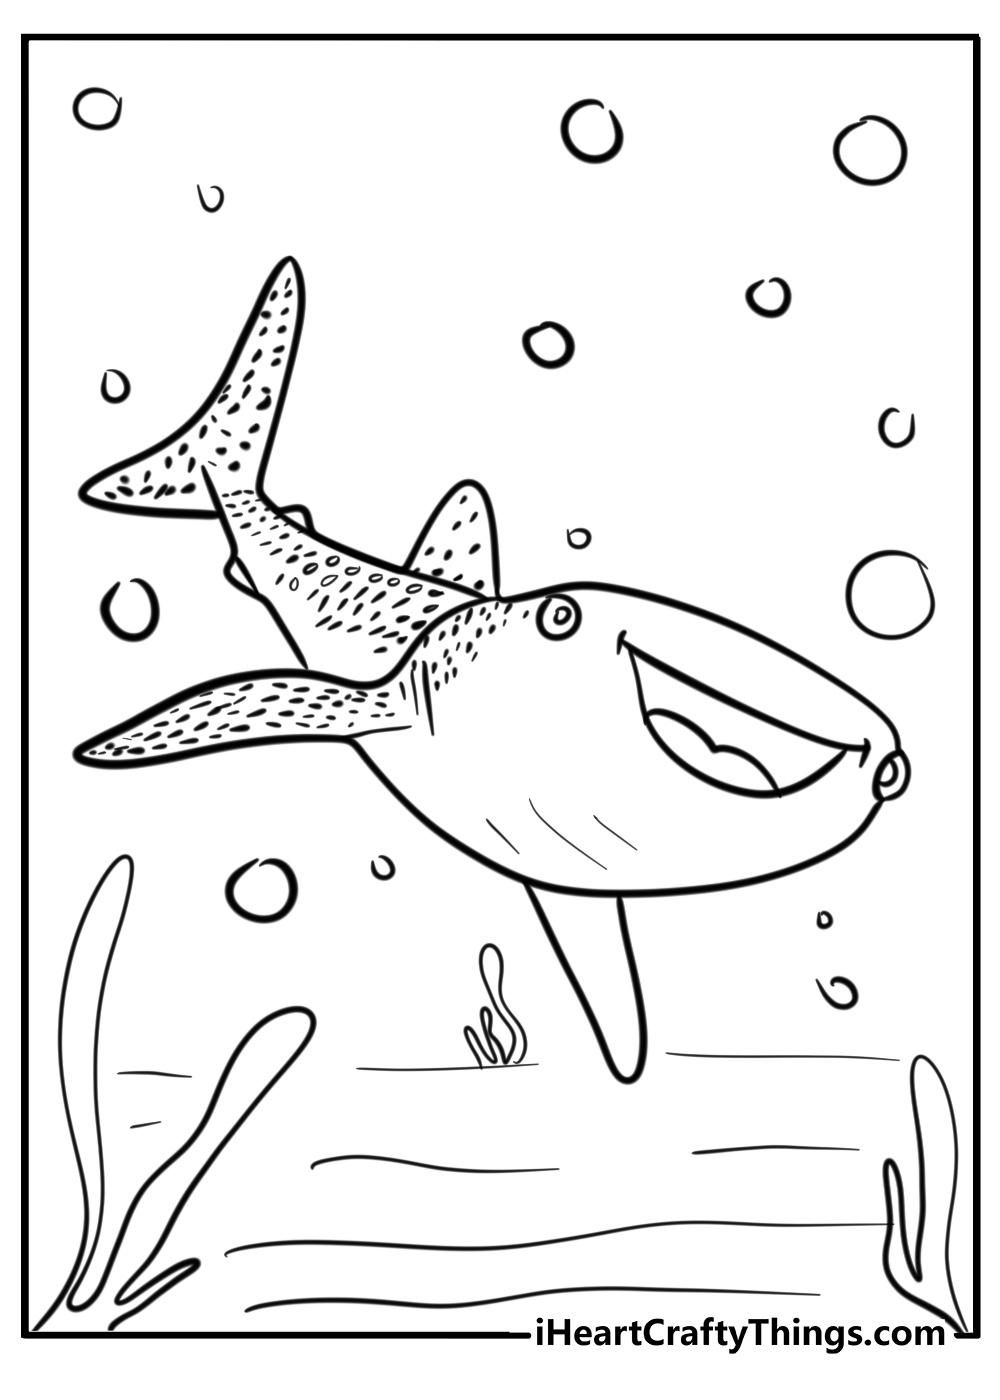 Textured whale shark coloring page